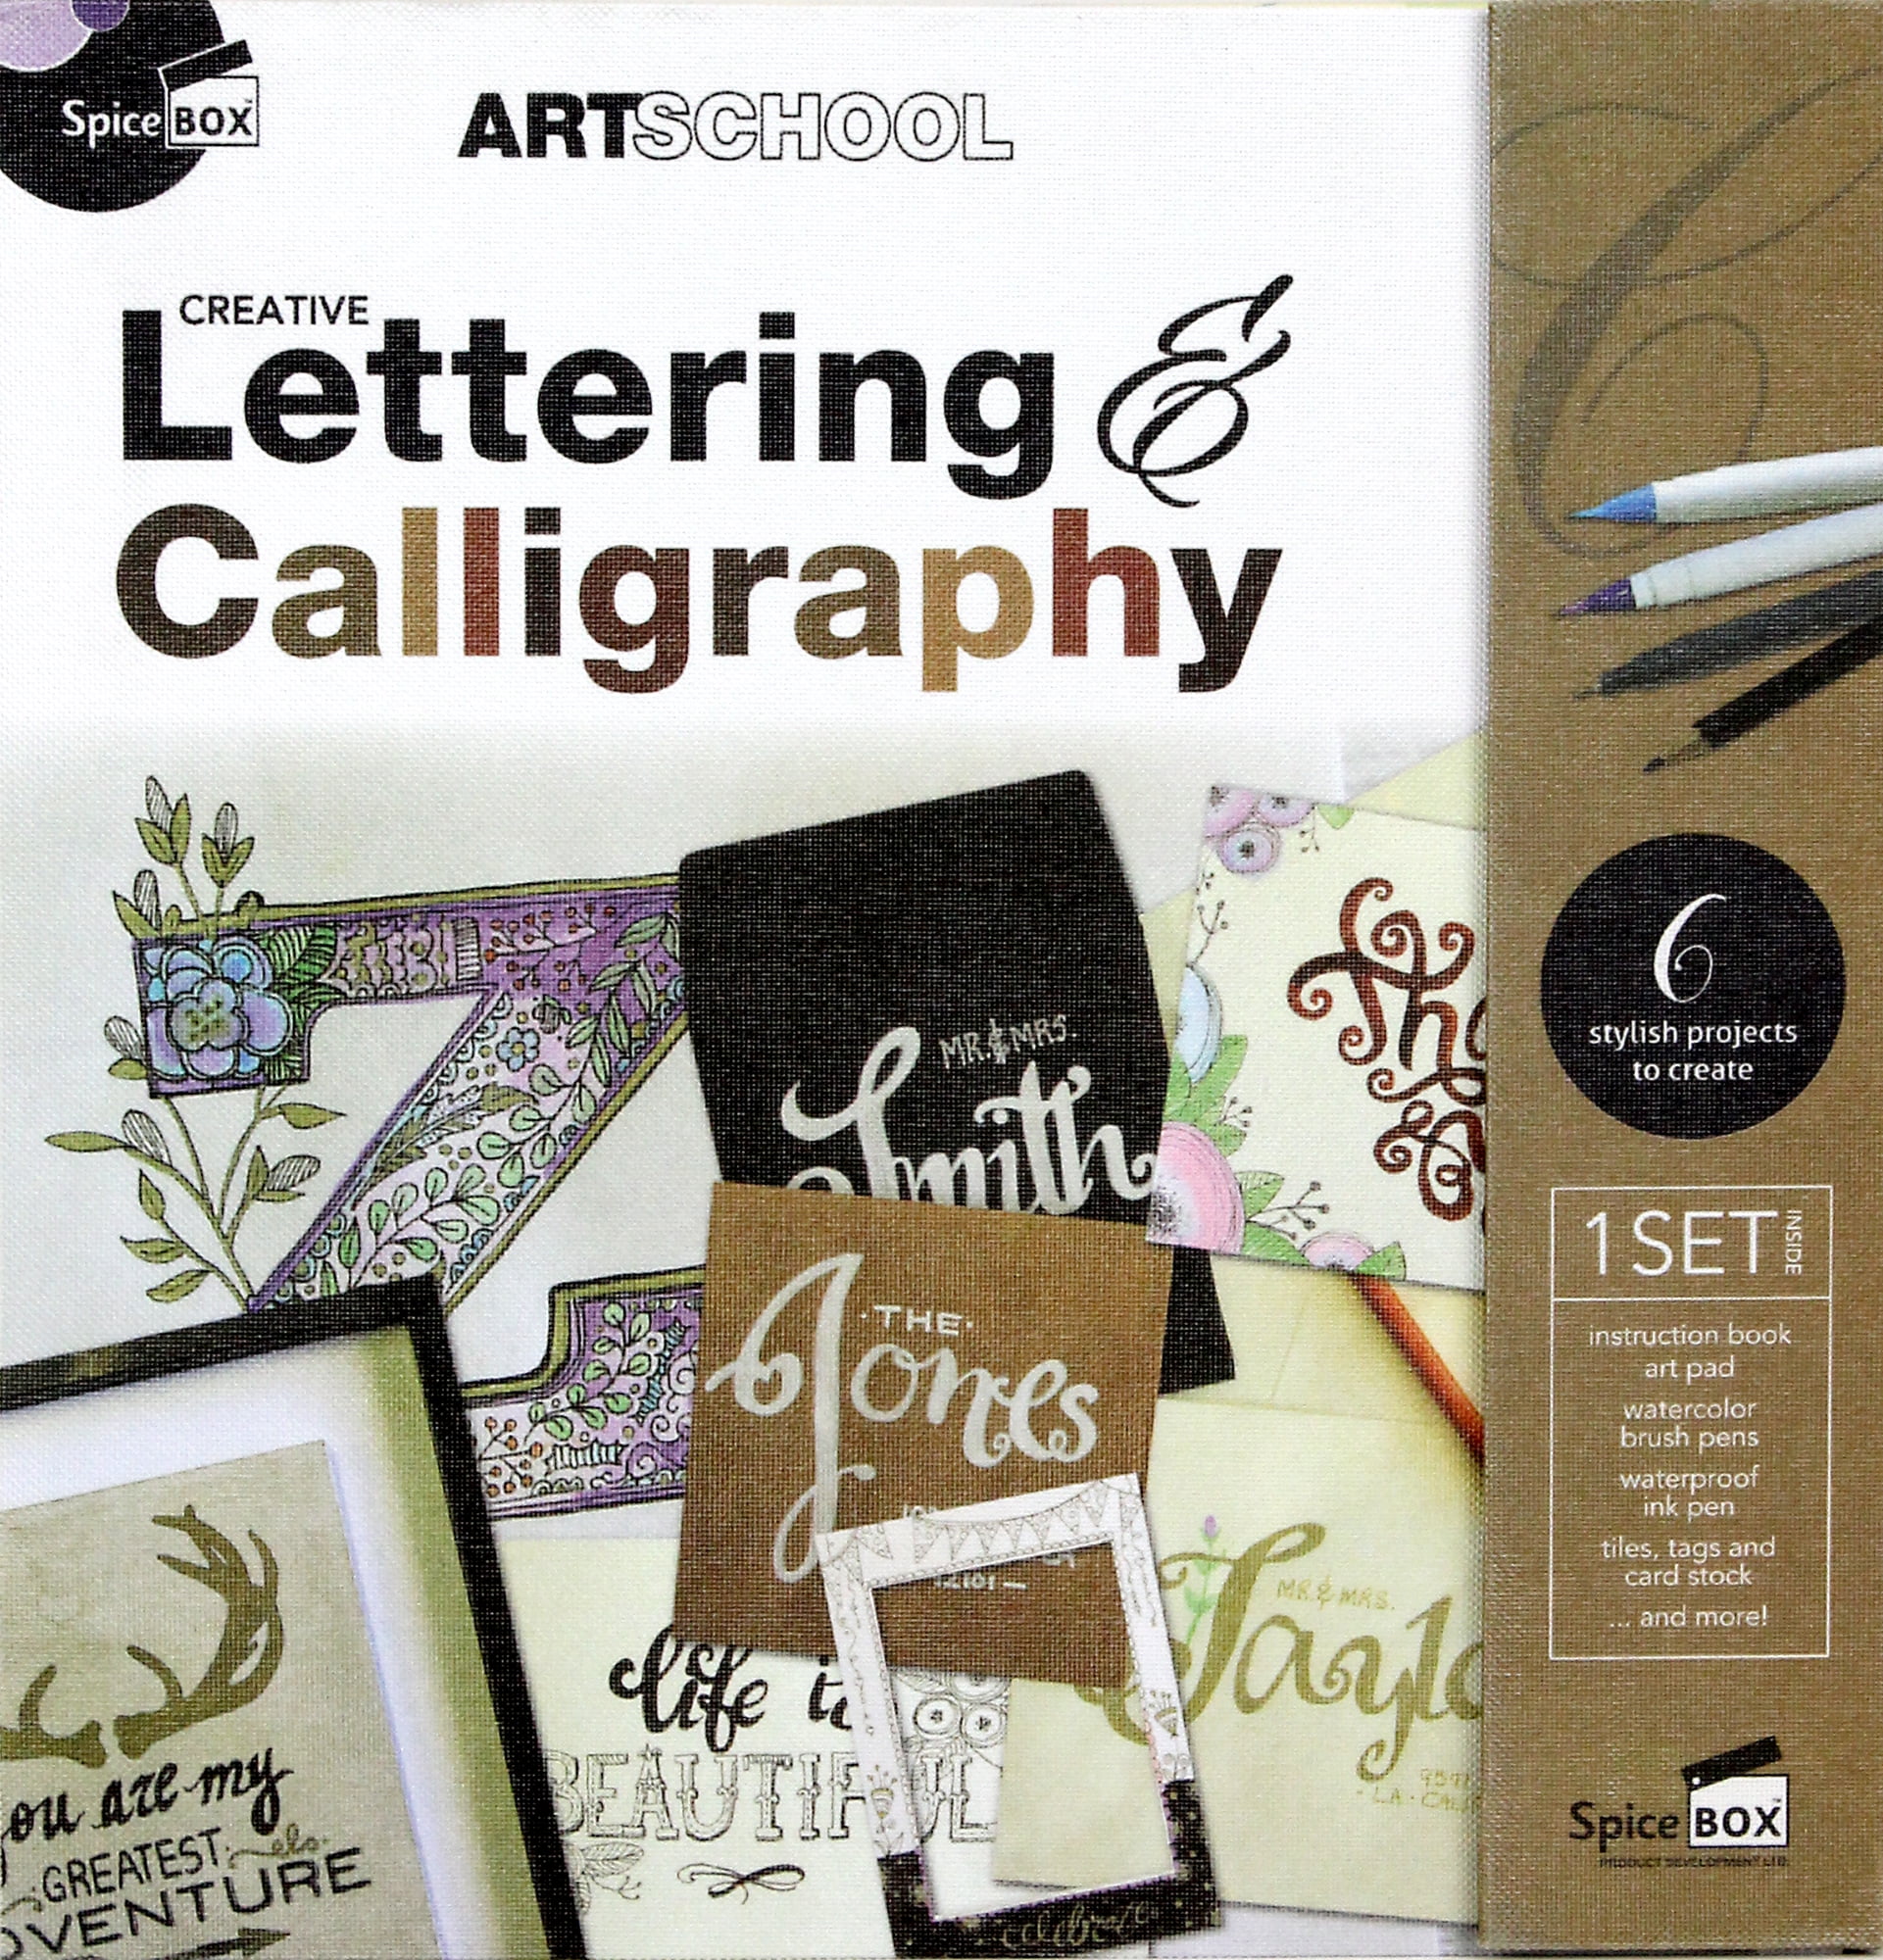 Calligraphy and Hand Lettering for Beginners: An Interactive